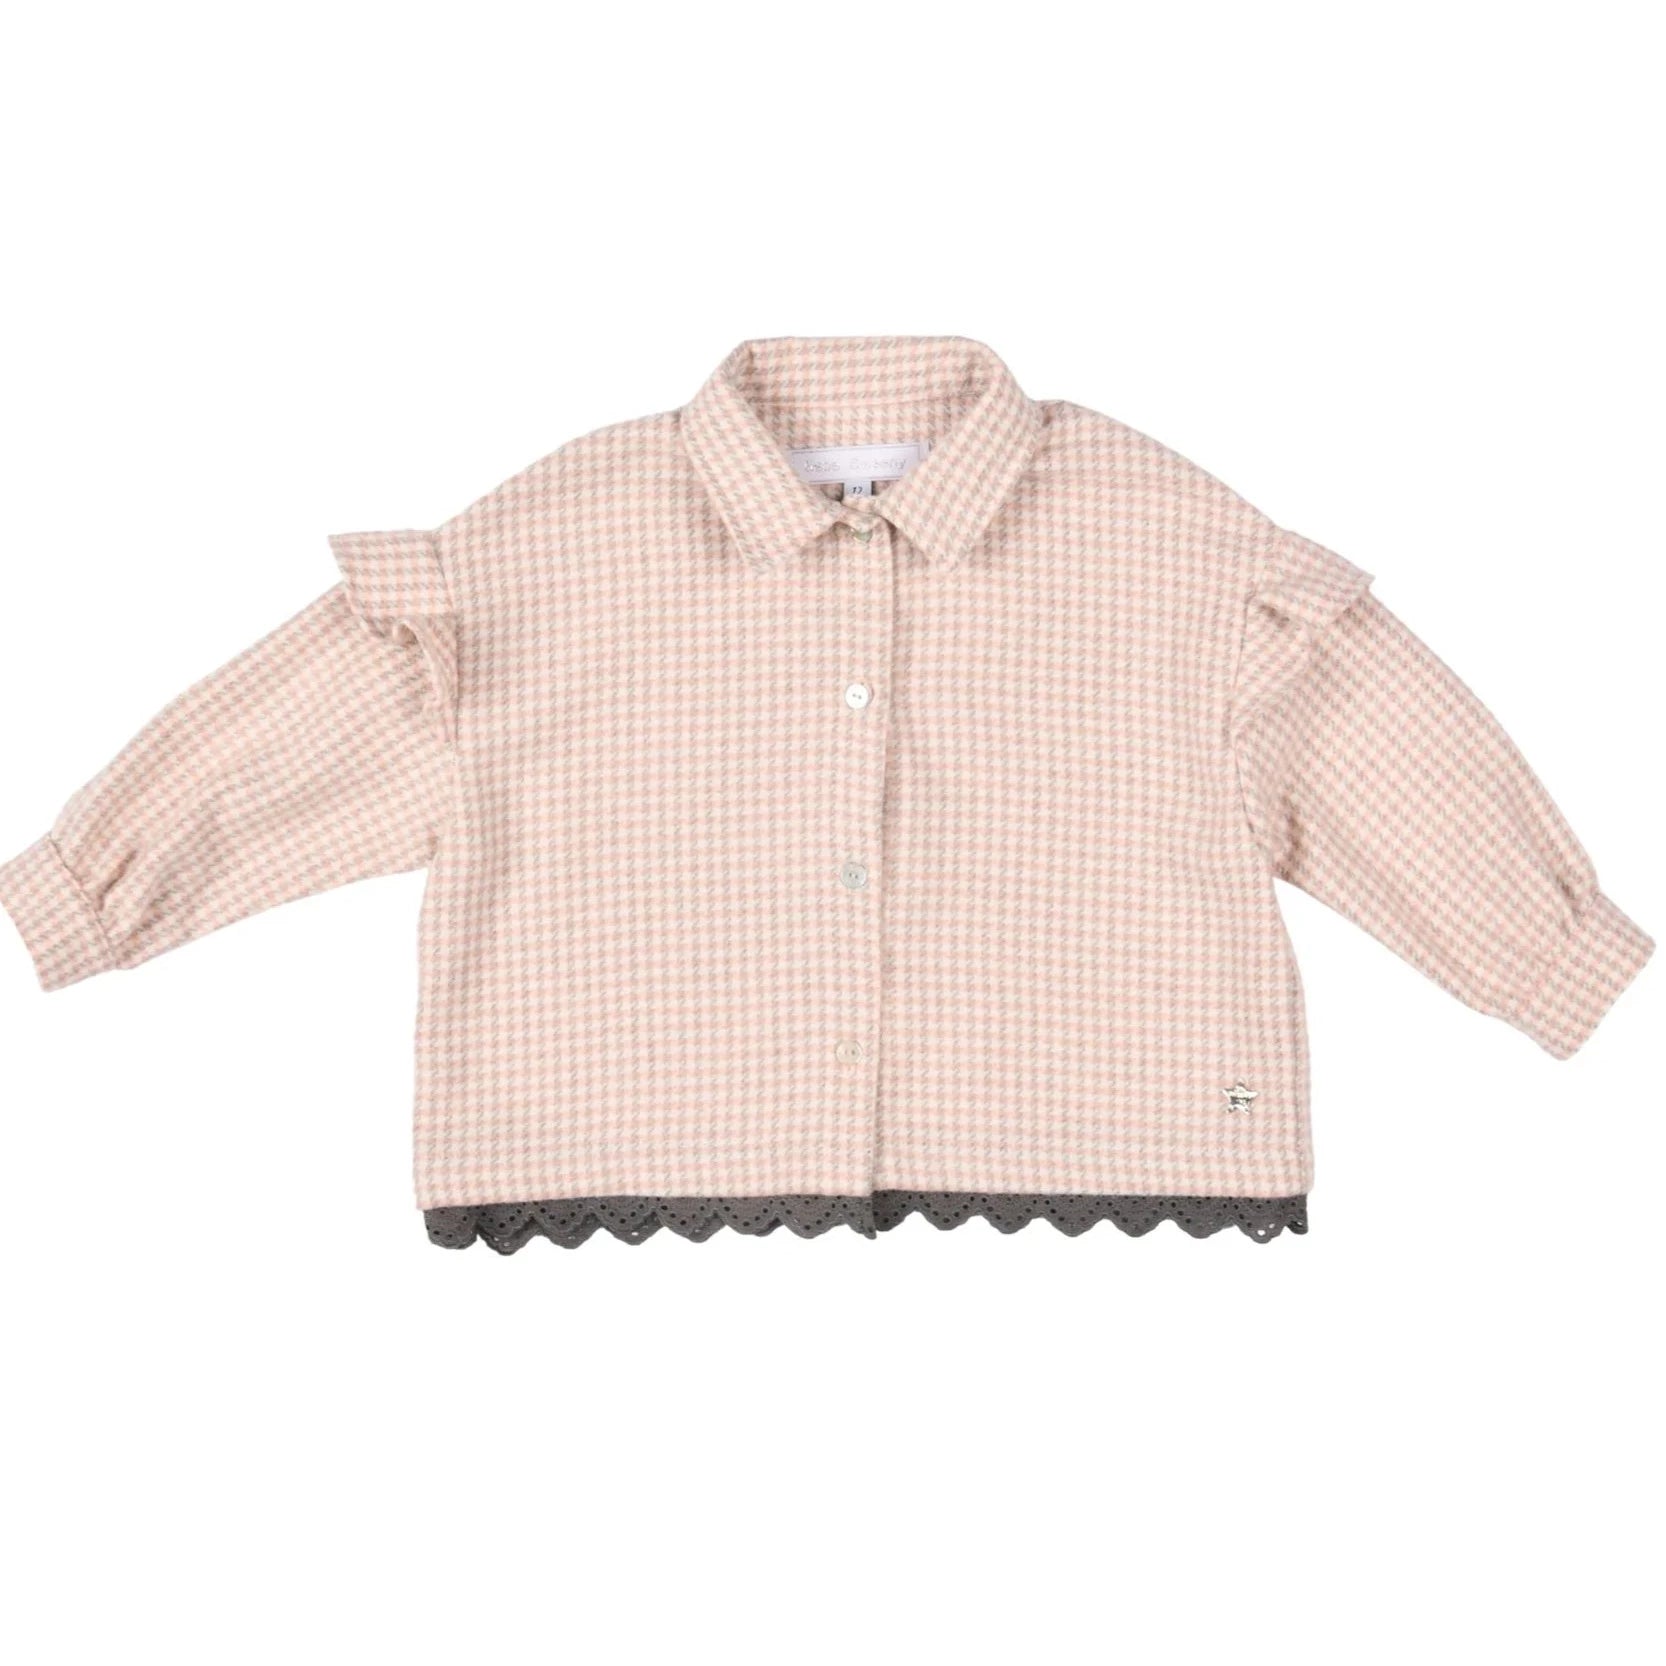 Bébé Sweeny Edna Overshirt - Grey & Pink Cotton Flannel with Lace Trim for 12M-36M - Colly Set - CapuletKids